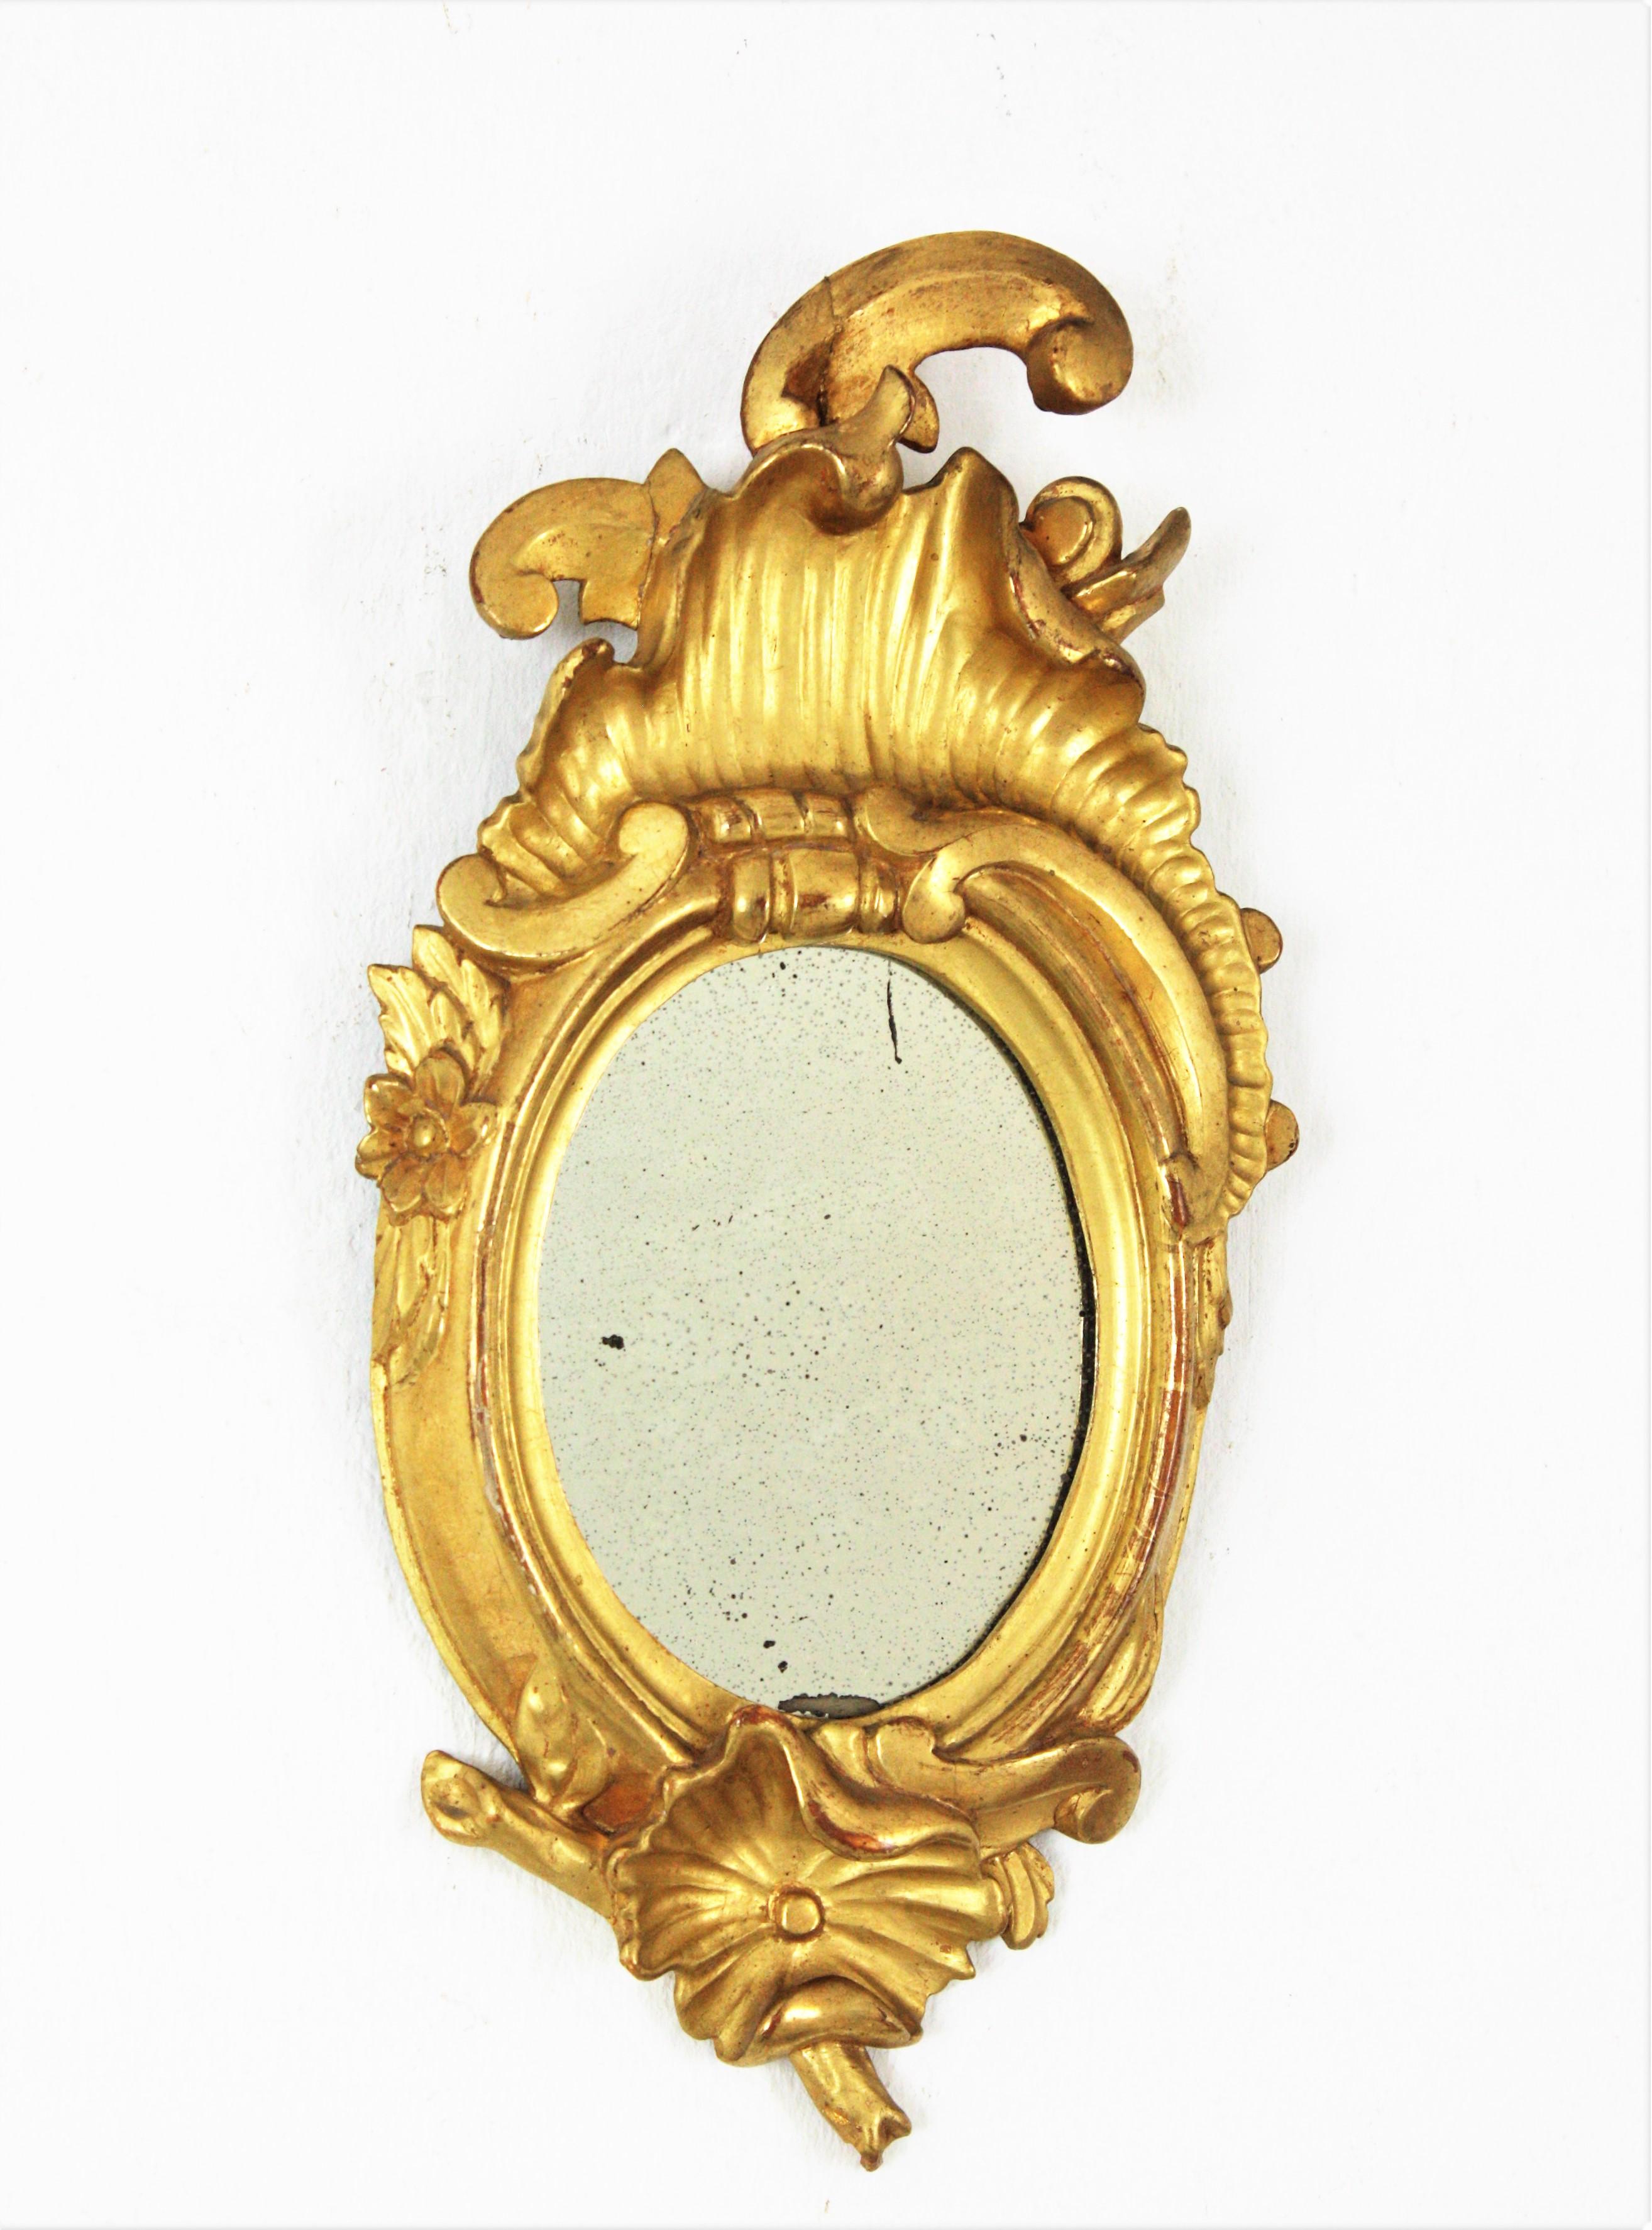 Gold Leaf Giltwood Minature Mirror with Crest, Spain, 1920s
Finely carved petite oval mirror with crest. Carved wood, covered with gesso, 24-karat gold leaf finishing. 
This small sized Art Nouveau carved mirror has a naturalistic design with